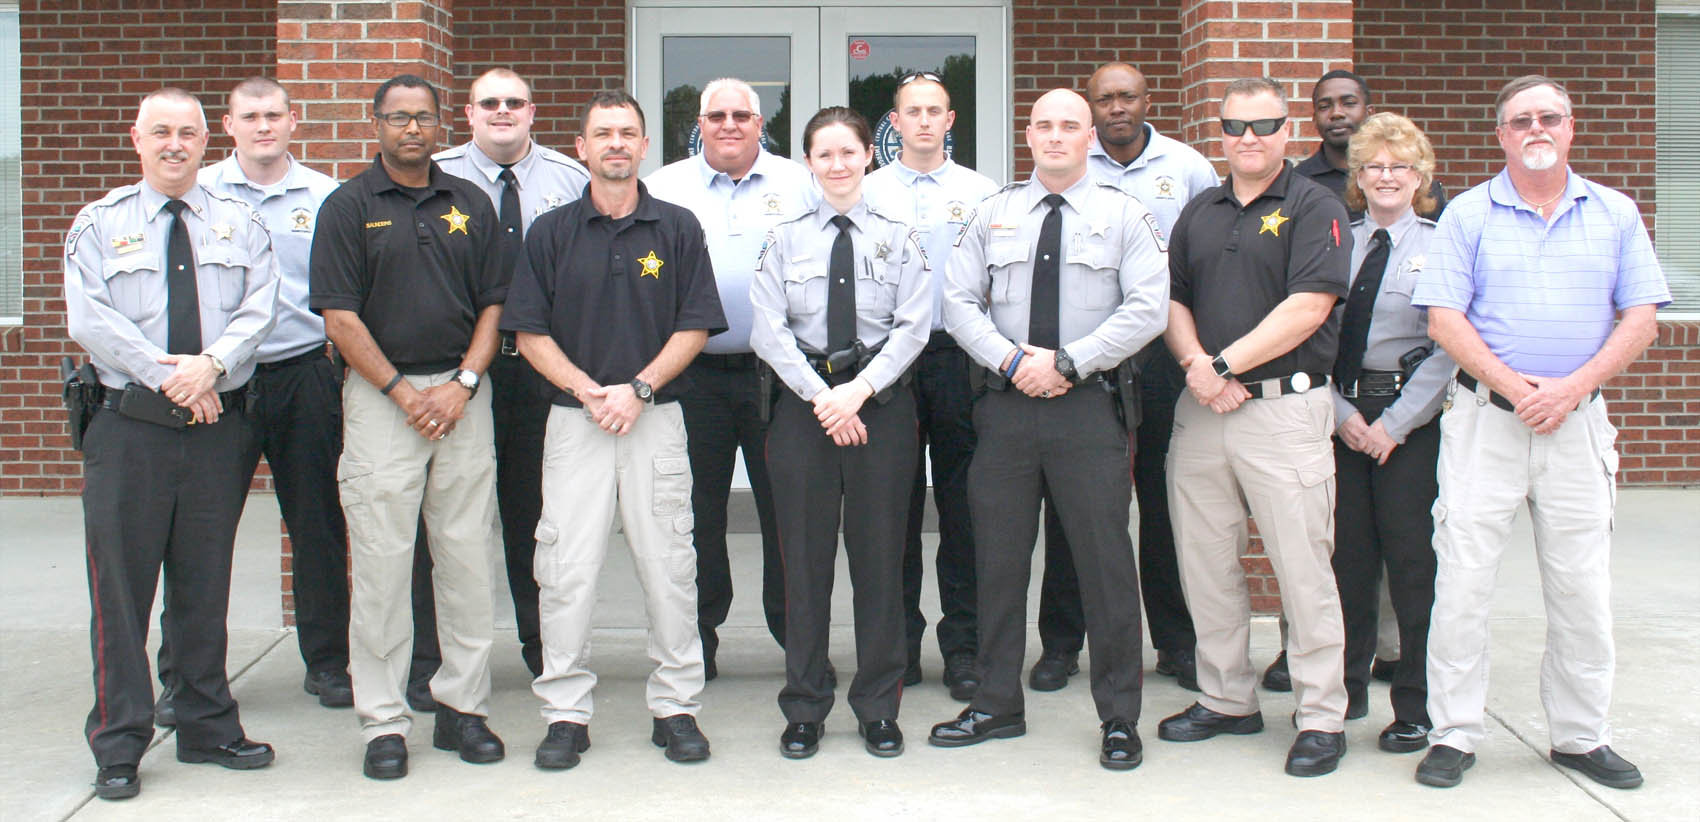 Click to enlarge,  Officers from the Chatham, Harnett, and Lee counties Sheriffs' offices graduated from Central Carolina Community College's Detention Officer School on Thursday March 31. Pictured are, left to right: front row, Capt. Douglas Stuart (School Director), Sorrell Saunders, Michael Bailey, Ashley Giles, Zach Blackwell, Gregory McCormick, Lt. Tammy Kirkman (Assistant), and Larry Foster (School Director); back row, Christopher Beasley, Chad Collins, Tracy Hamby, Marcus Allen, Amritraj Lock, and Brandon Covington. 